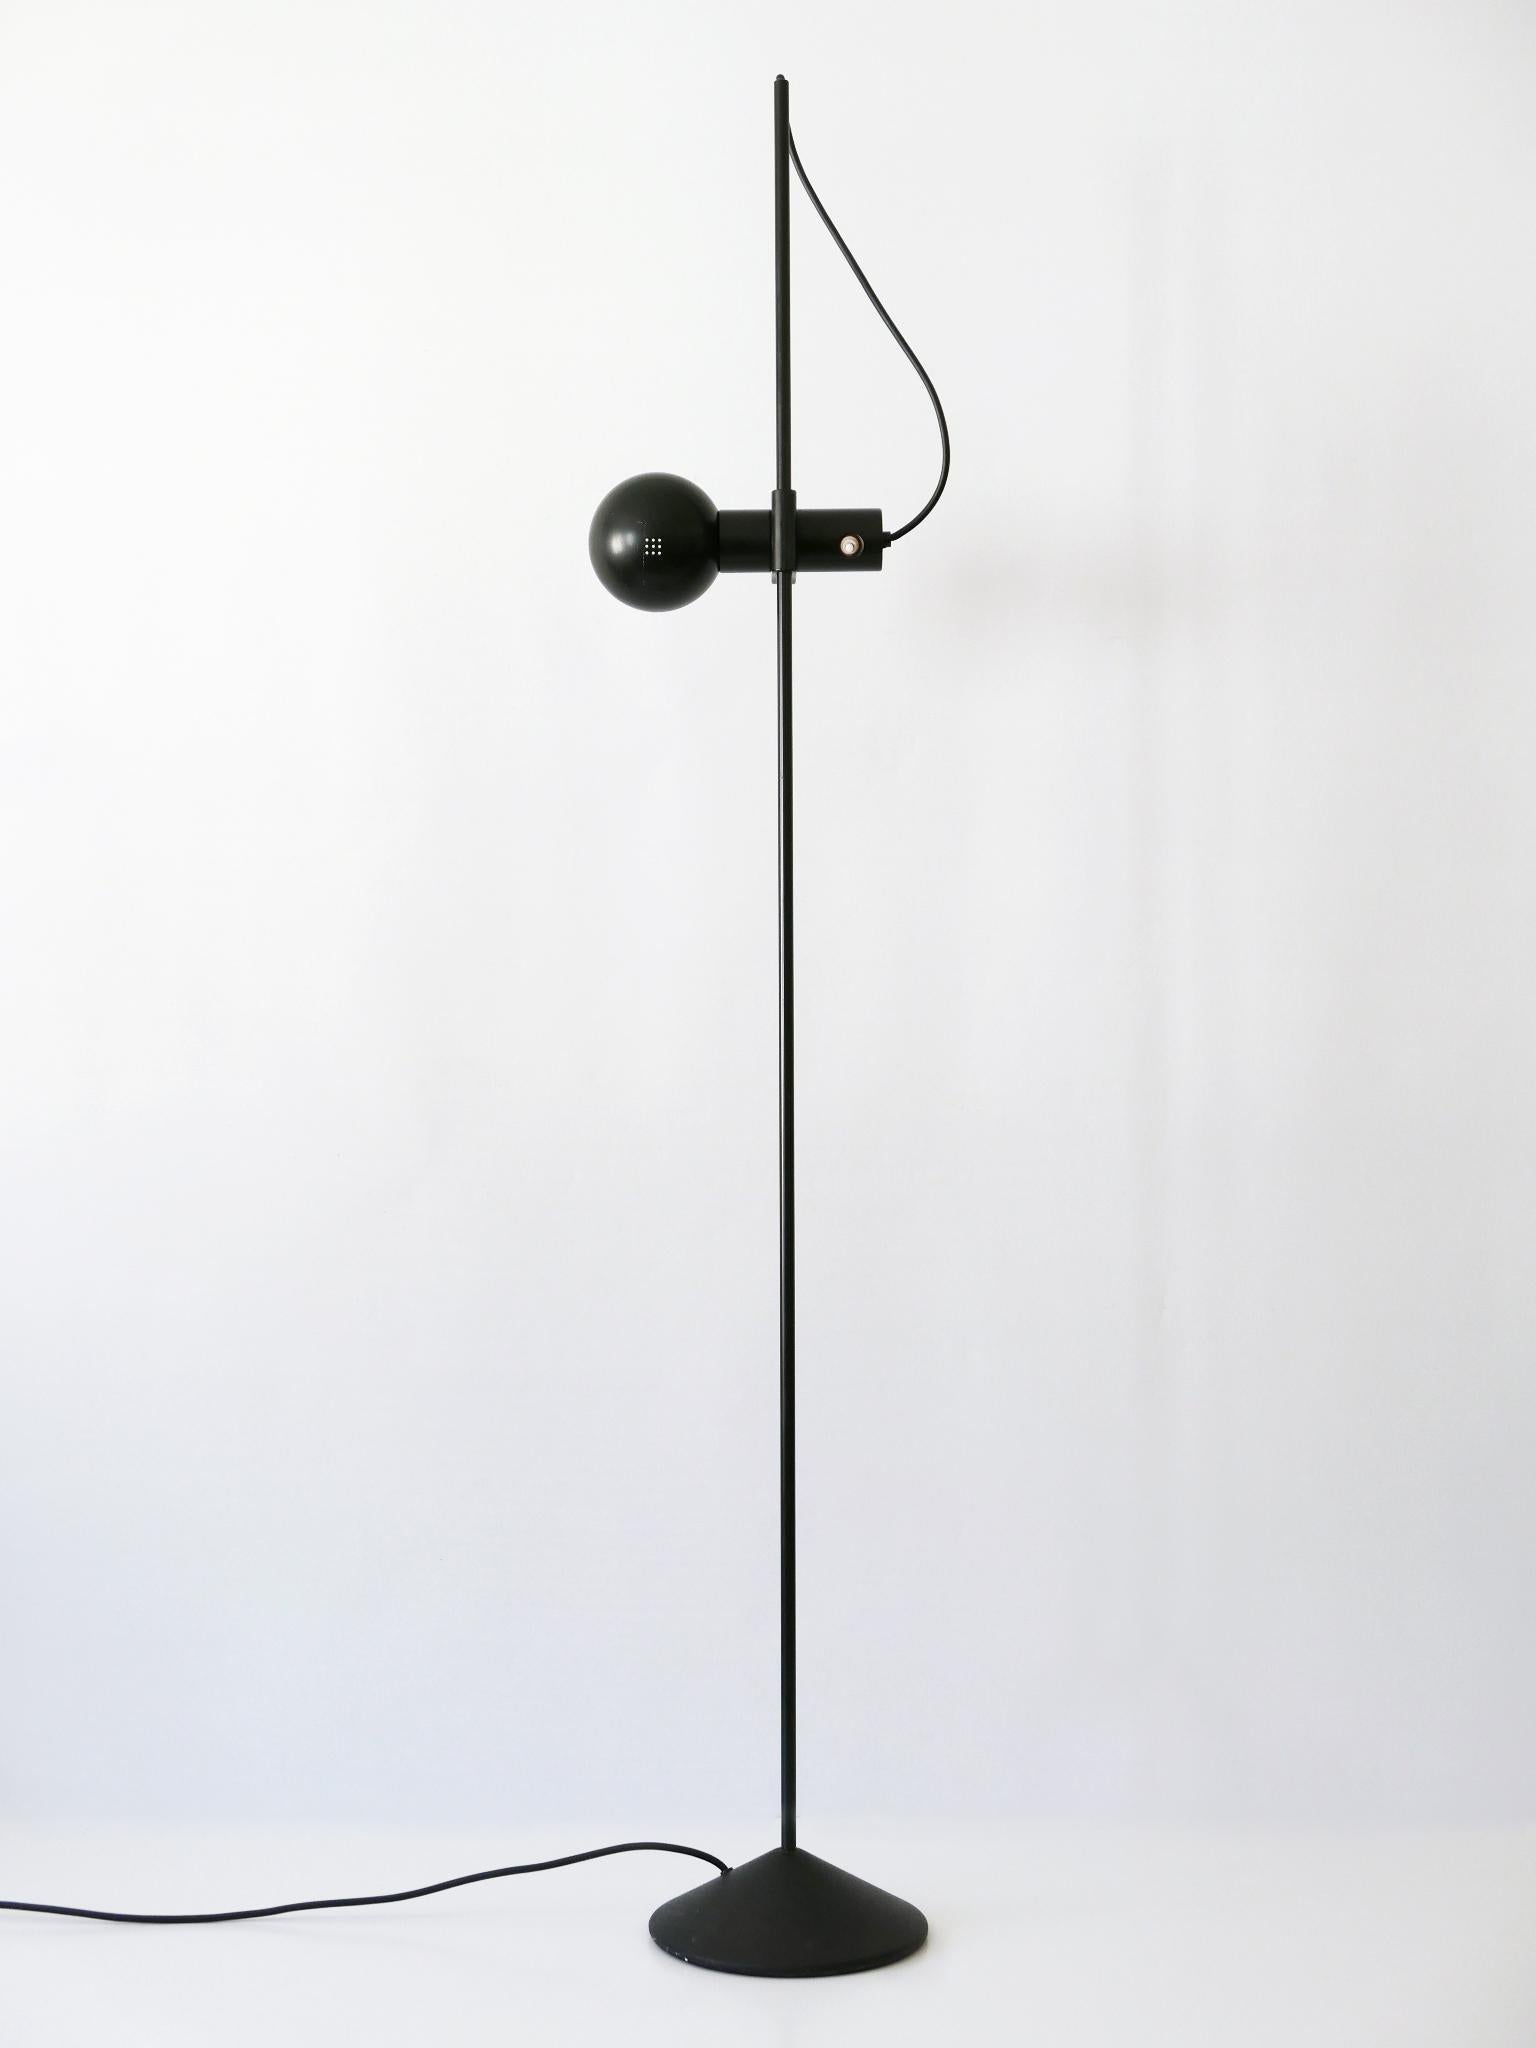 Rare, elegant and articulated Mid-Century Modern floor lamp or reading light with adjustable height and rotating diffuser. Designed by Raul Barbieri & Giorgio Marianelli for Tronconi, Italy, 1970s.

Executed in black painted metal, the lamp needs